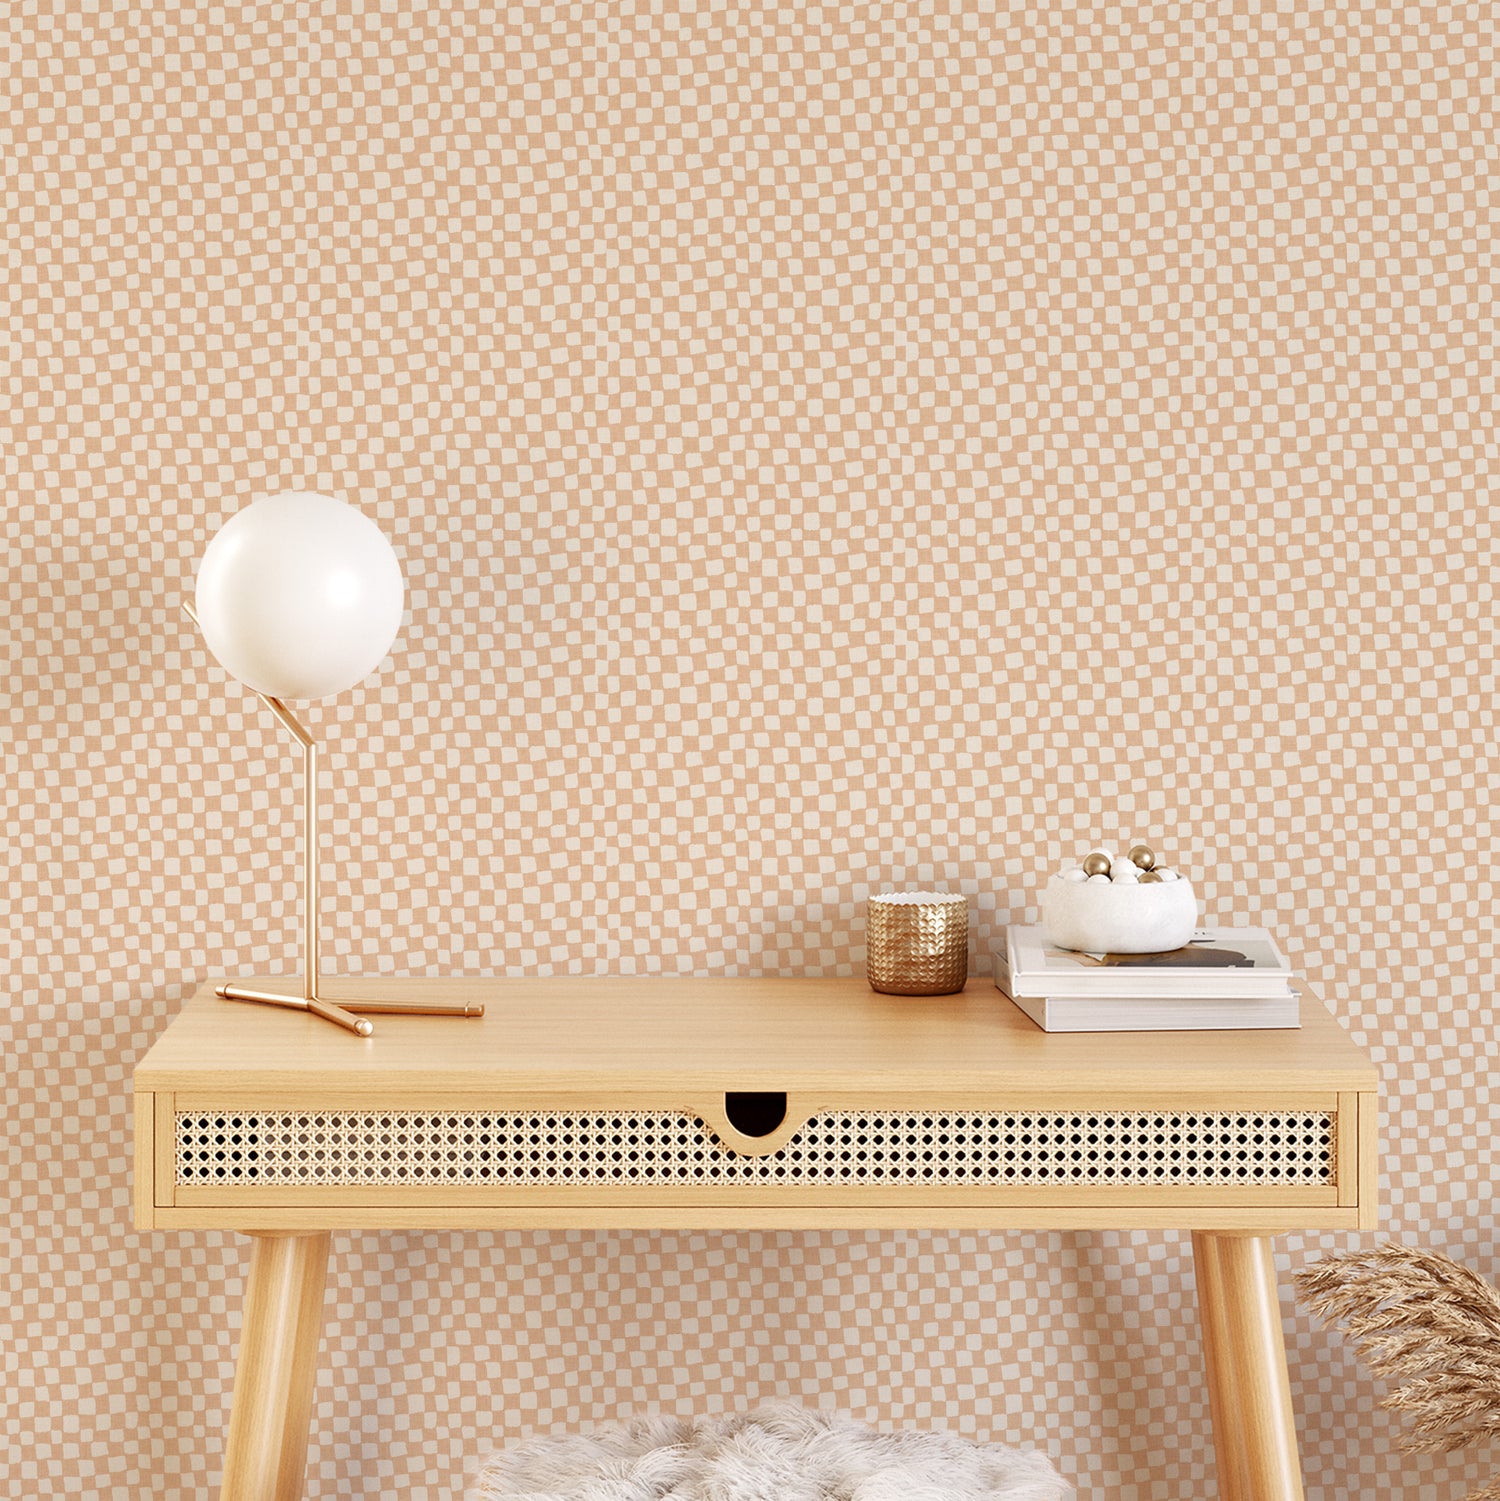 Transform your space with Lazy Checkers Wallpaper – Coral. Featuring playful, uneven visuals for a dynamic, three-dimensional look, this wallpaper can bring a sense of movement and energy to any room.